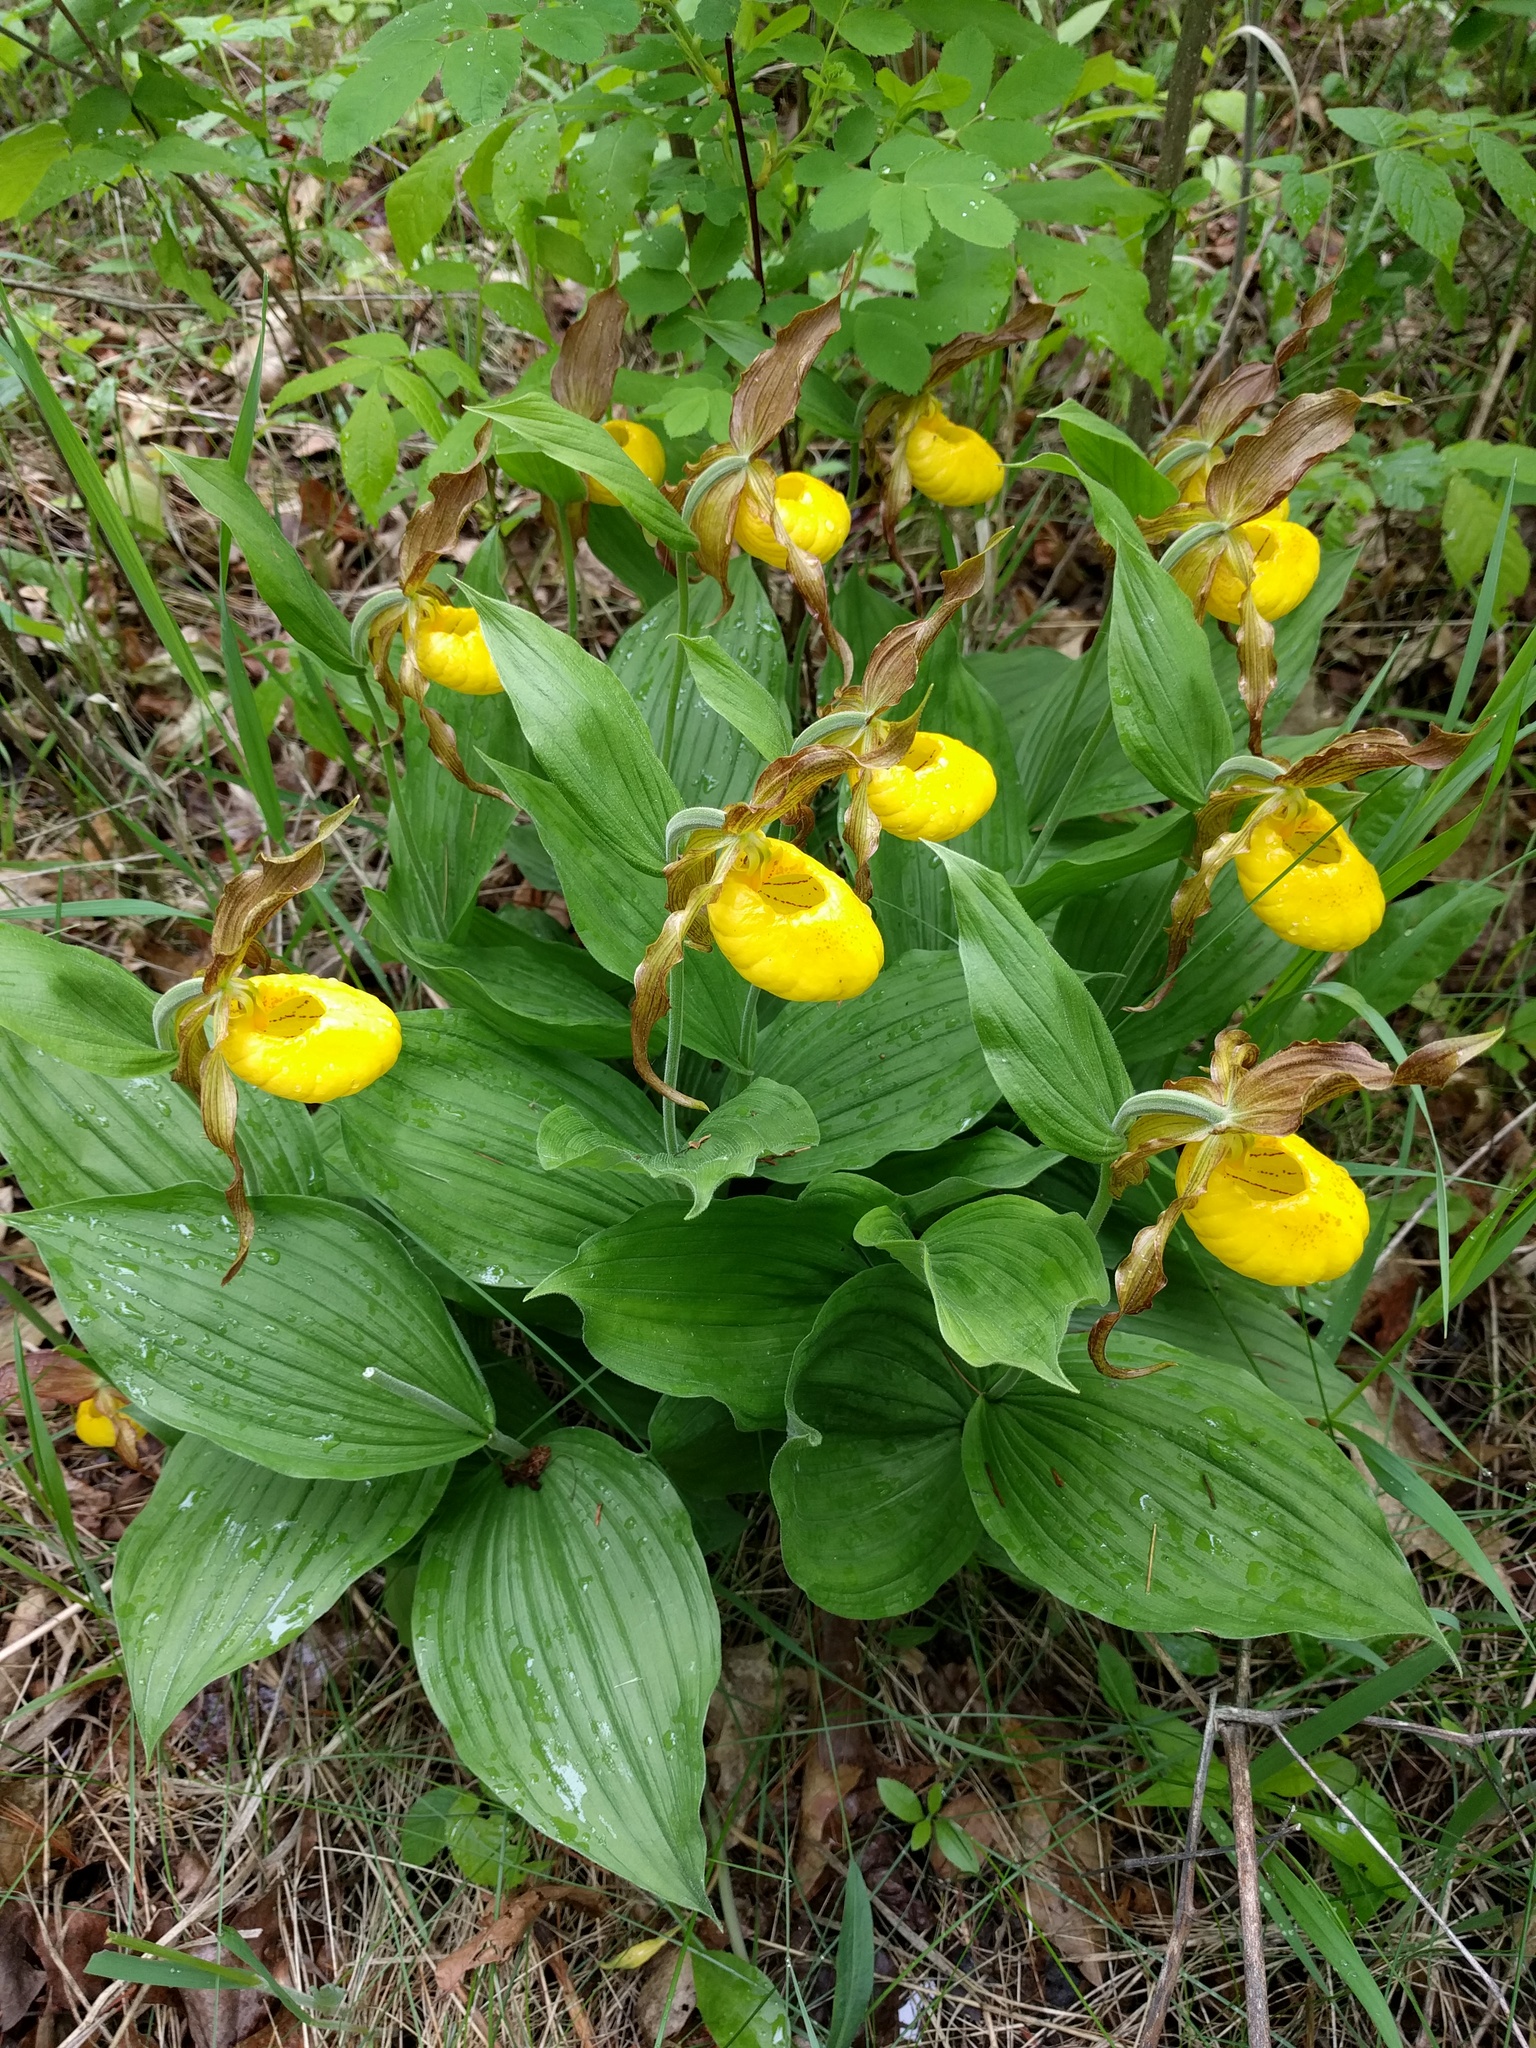 About ten bright yellow, slipper-shaped flowers are seen here on the forest floor.